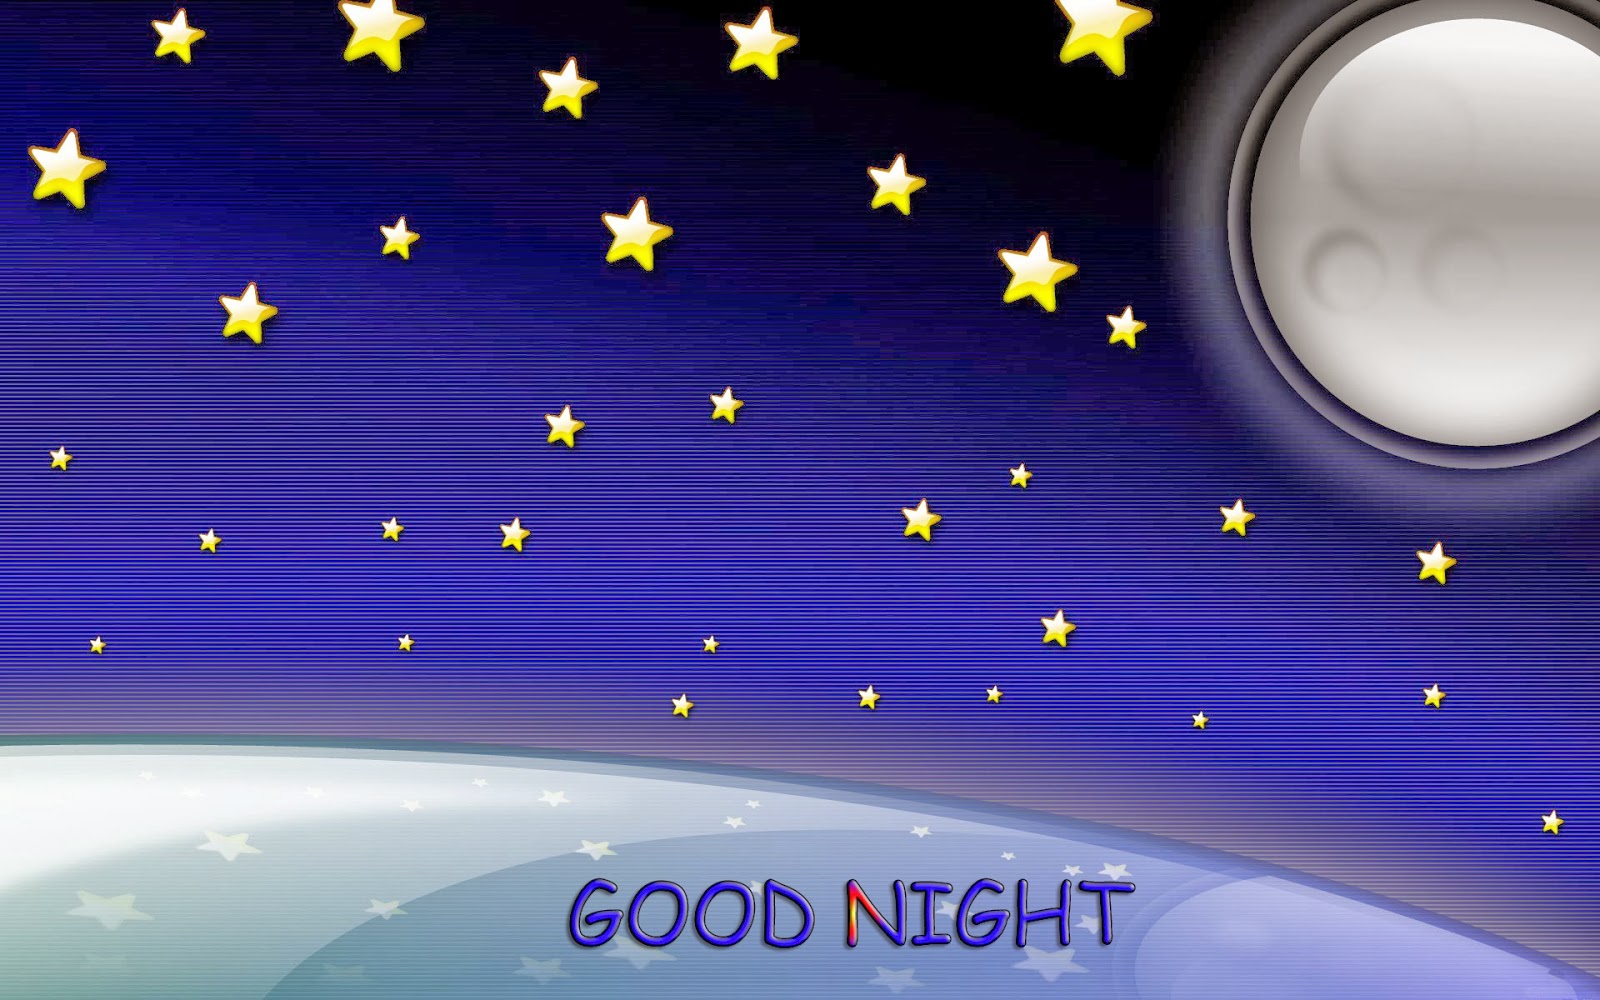 ... to facebook labels freedownloadwallpapers good night gud night quotes